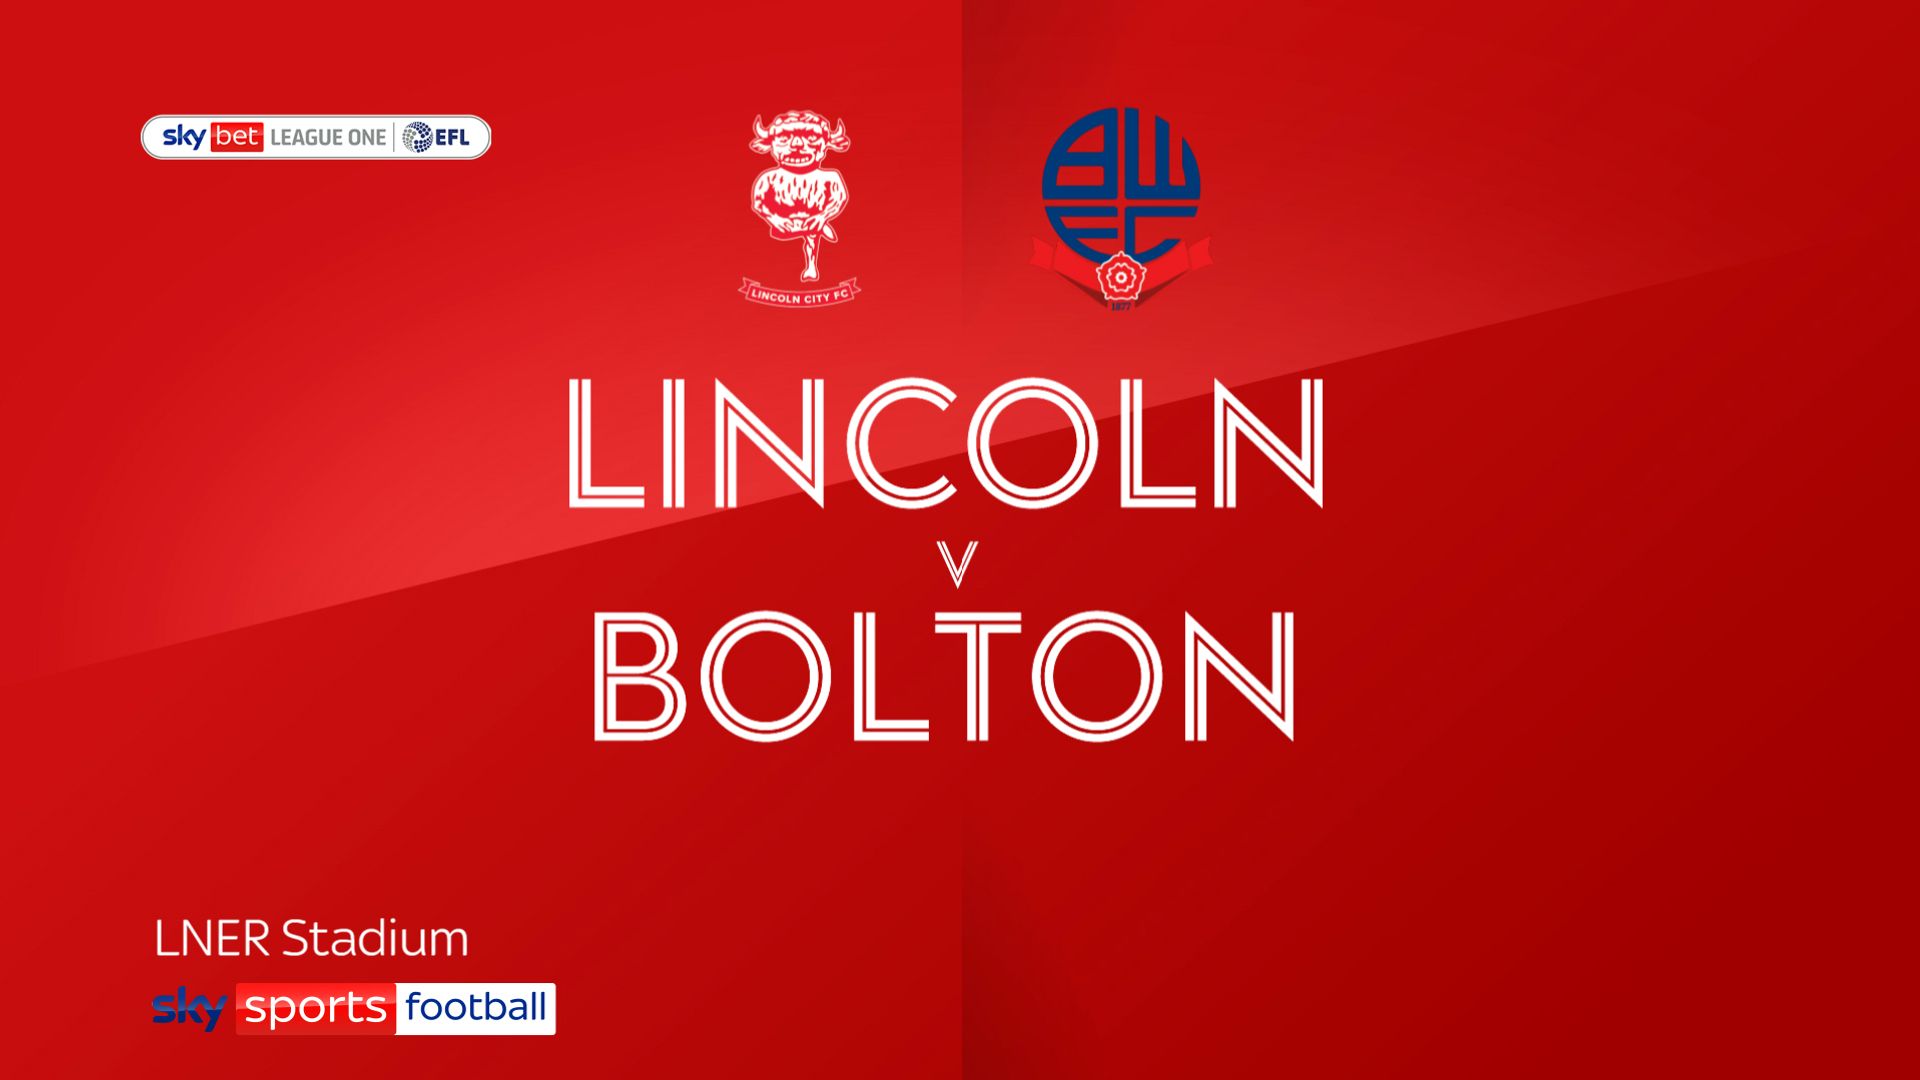 Lincoln 1-1 Bolton: Eoin toal earns point for Trotters against 10-man Imps